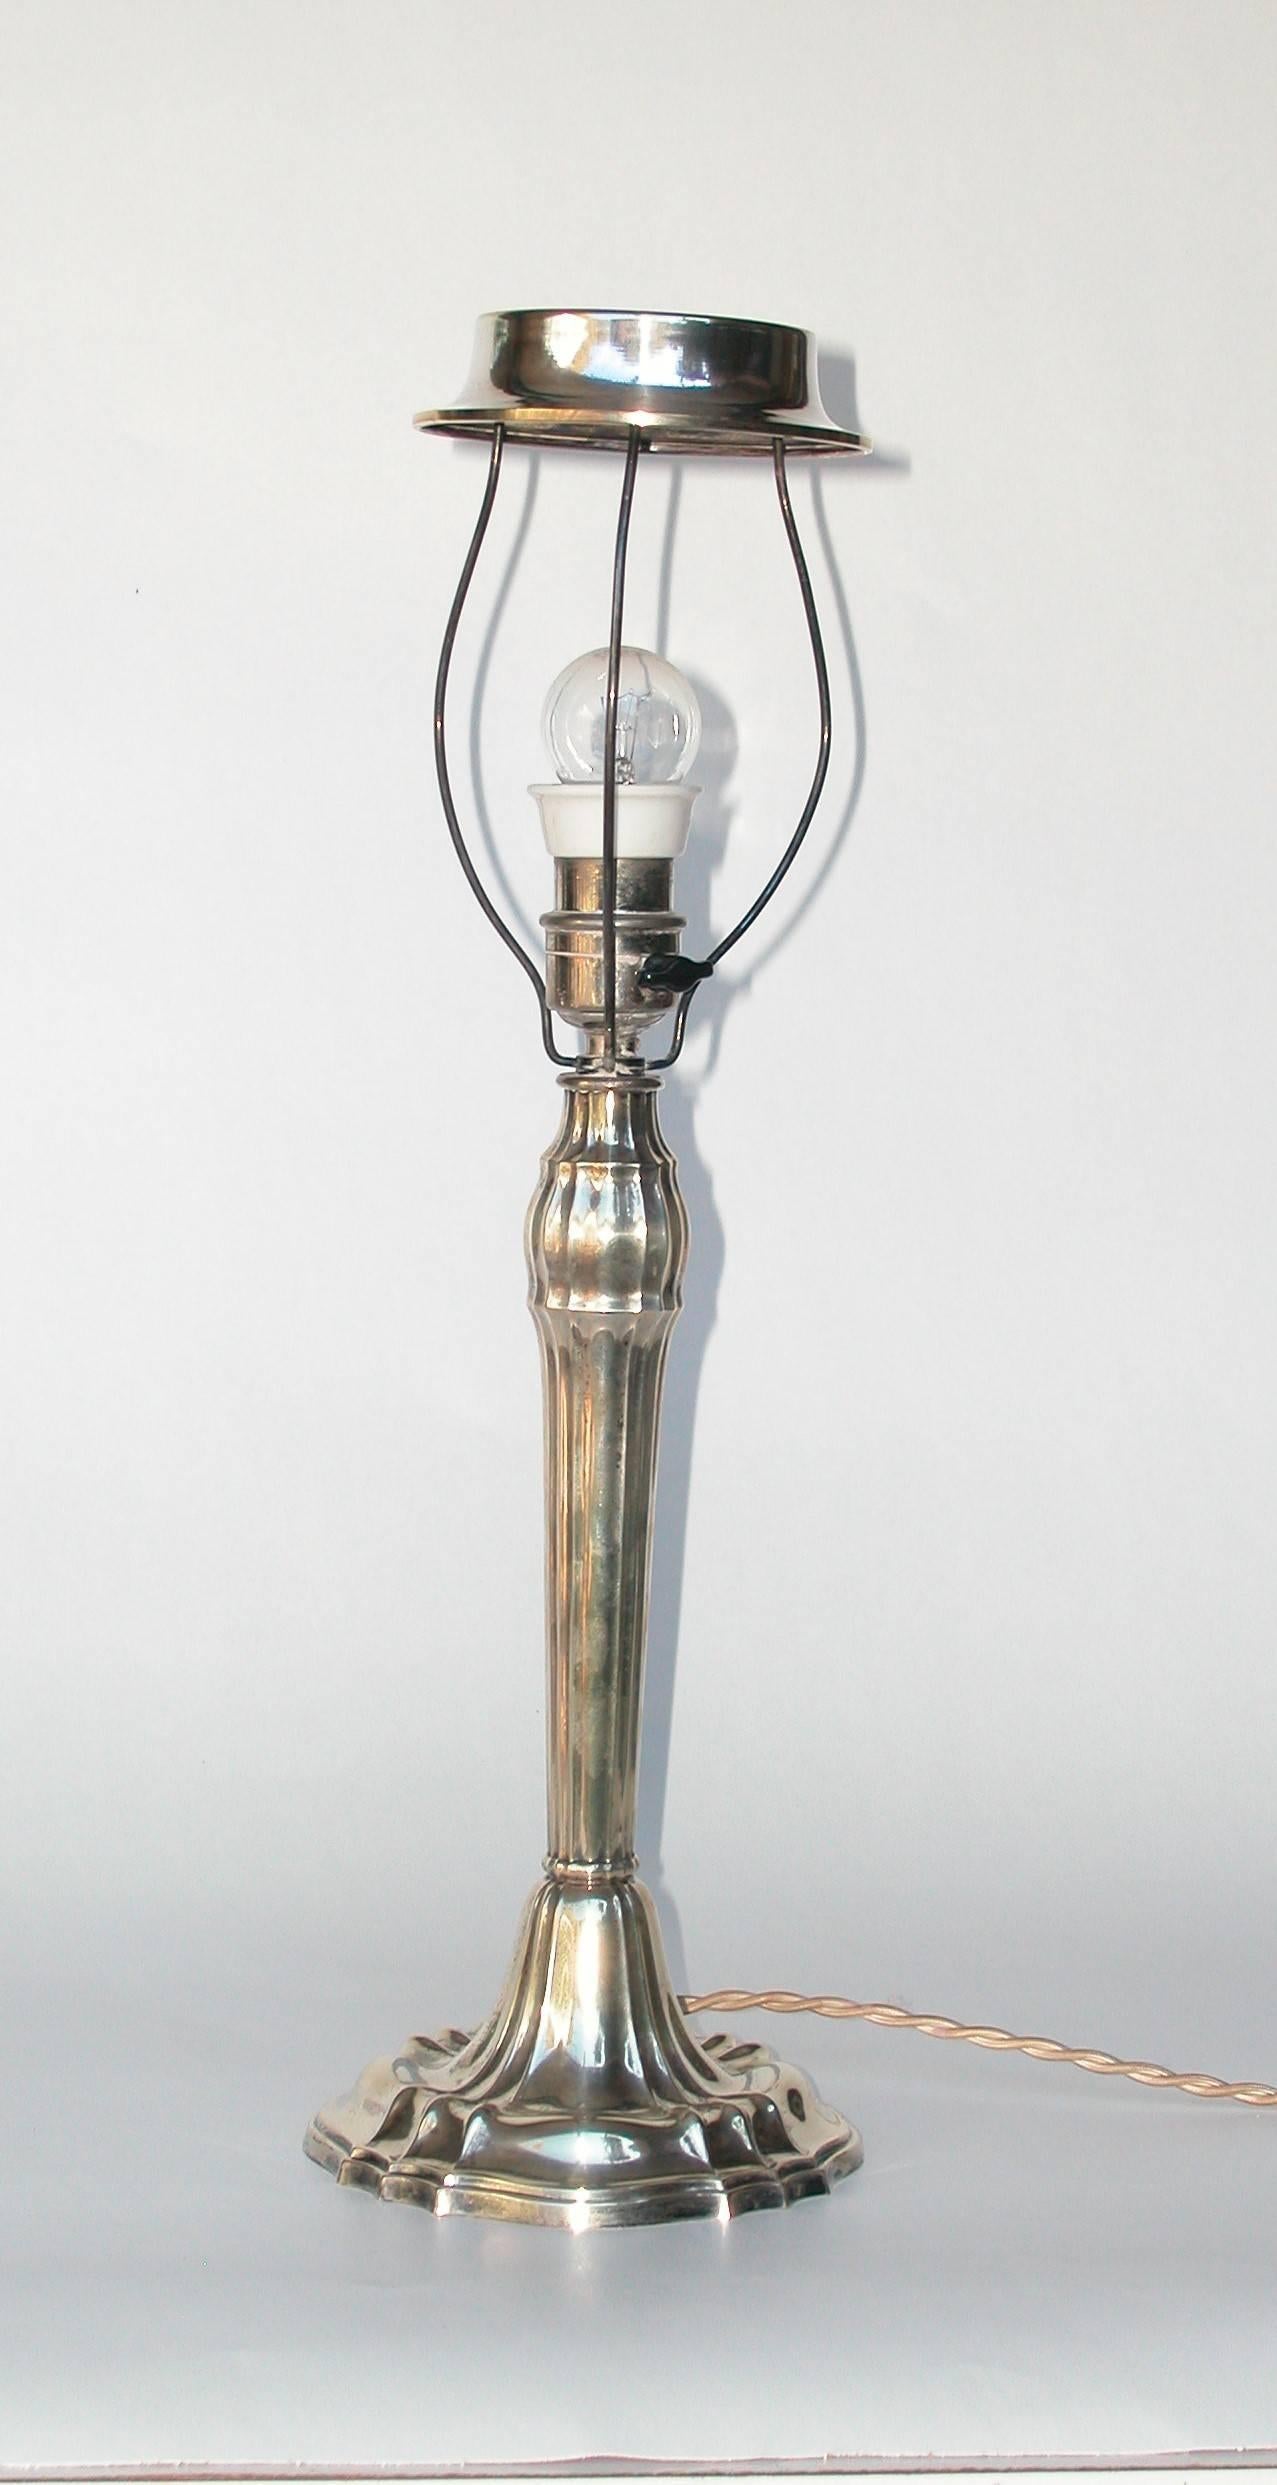 German Art Nouveau Table Lamp by Wilkens & Söhne, Germany, circa 1910.
In the Style of the Vienna Secession.
 
Silver and opaline glass with gold decor in the style of Josef Hoffmann.
Stamped with marks for 800 silver, press mark for Wilkens &